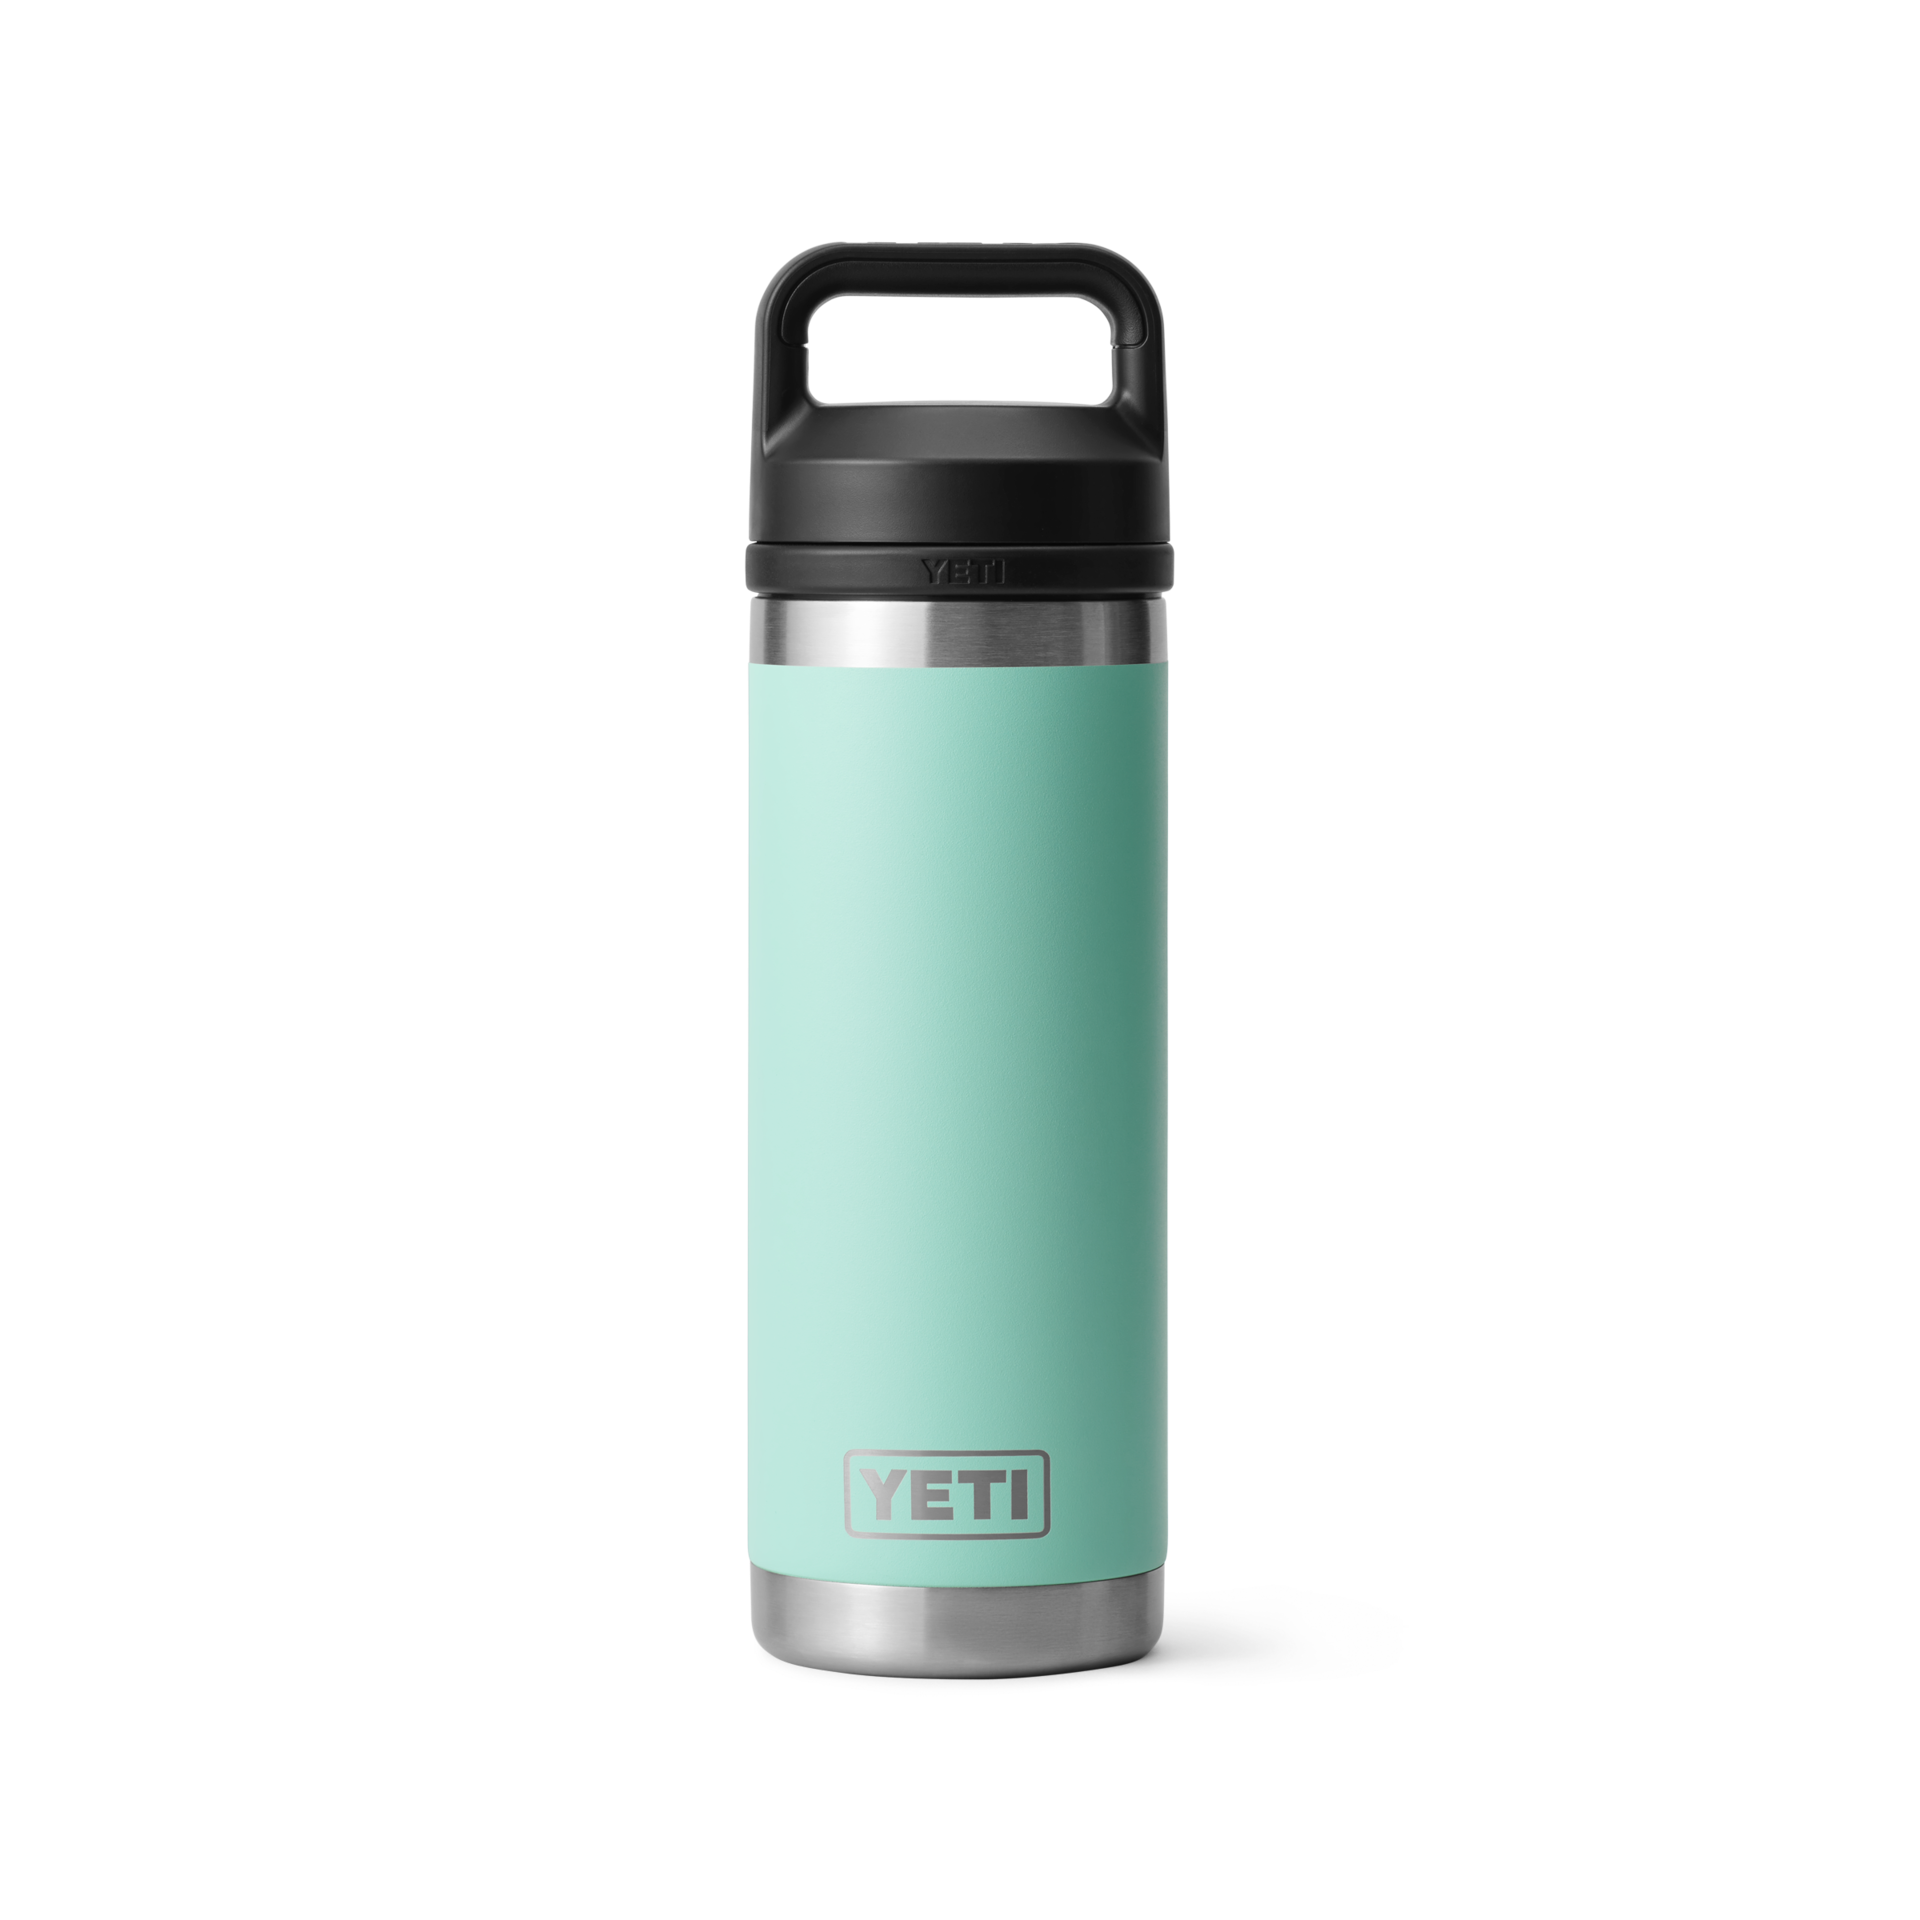 Dickson Barbeque Centre - Avenue Rd - 🖲️ NEW ARRIVAL! Smaller size! Great  to have the new YETI 10oz Tumbler in stock for the holidays 😊👍. . #YETI  #YetiTumbler #YetiRambler #strong #durable #